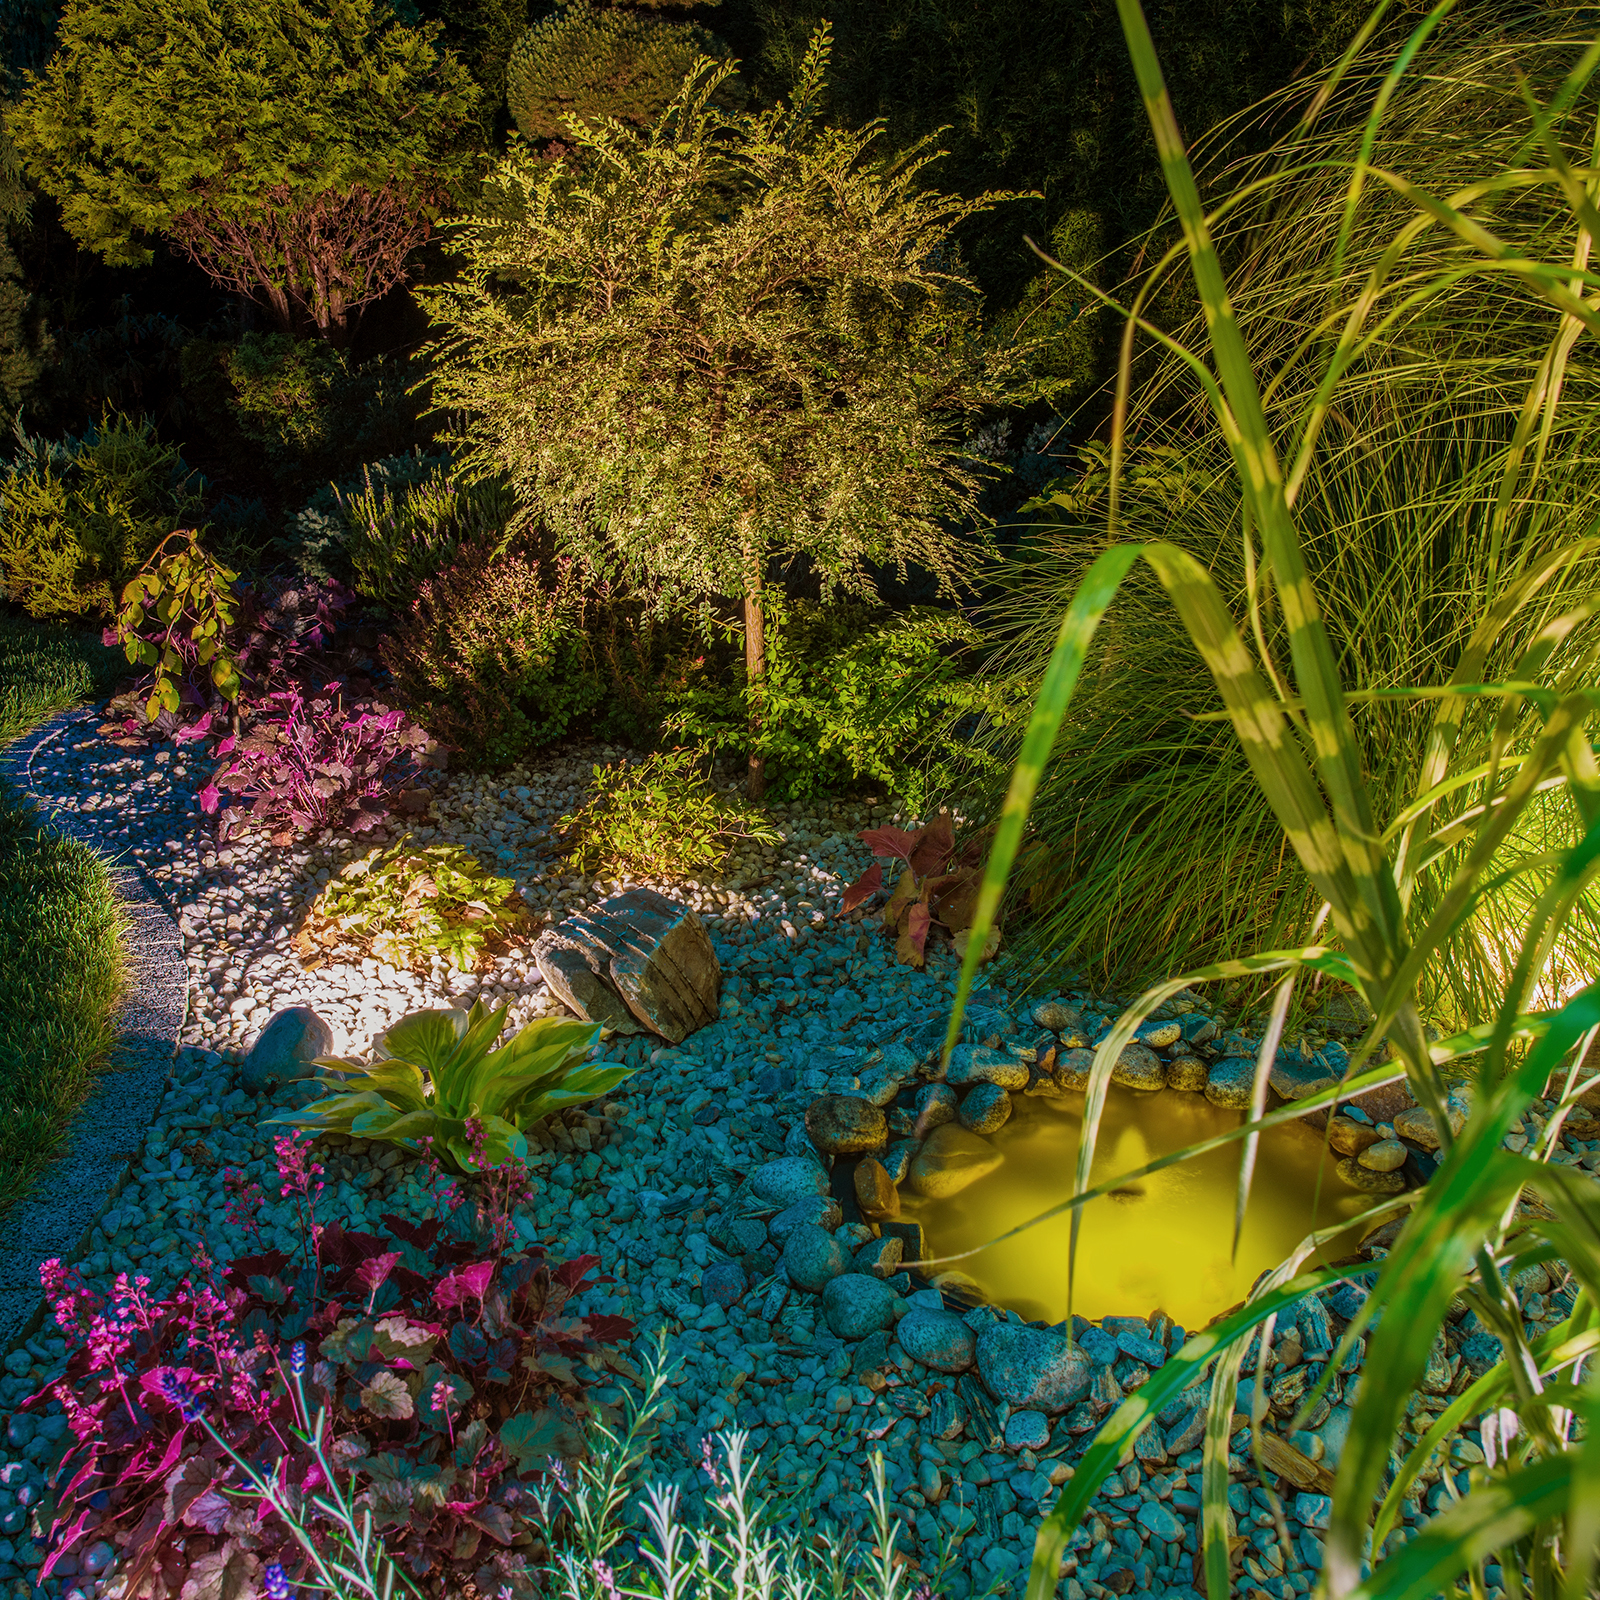 garden fountain and plants lit at night